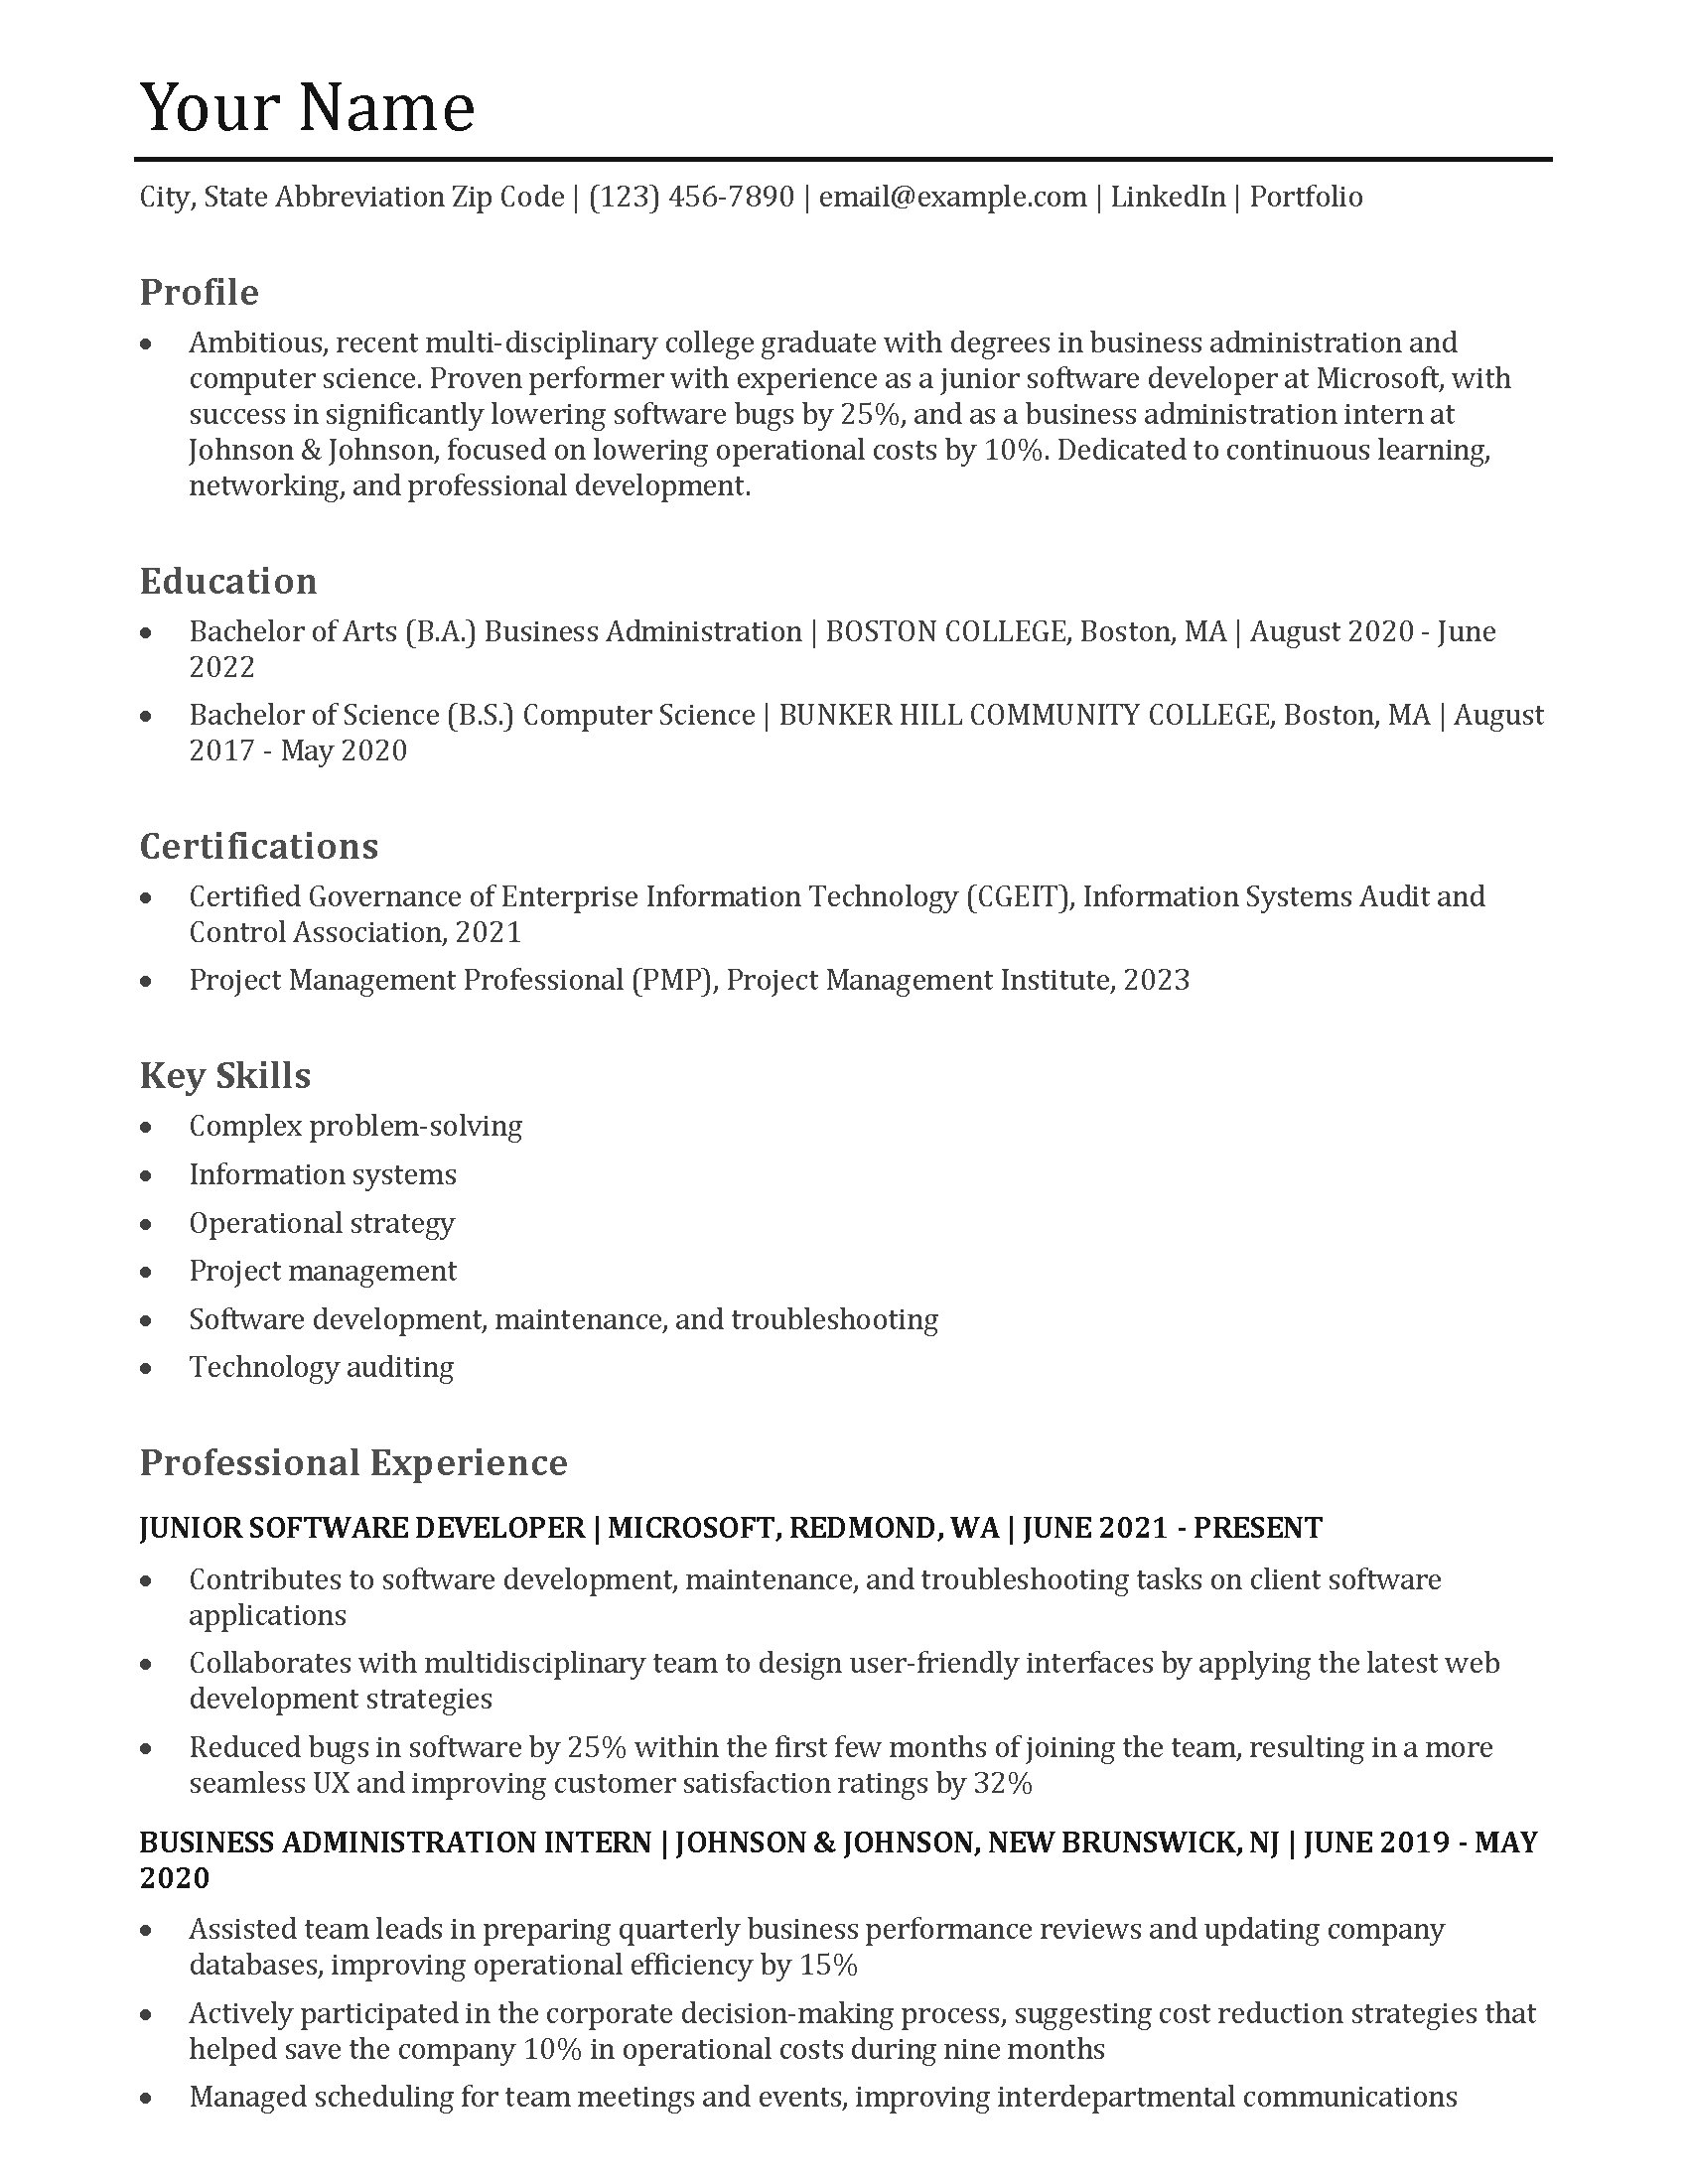 Recent College Graduate Resume Template and Examples